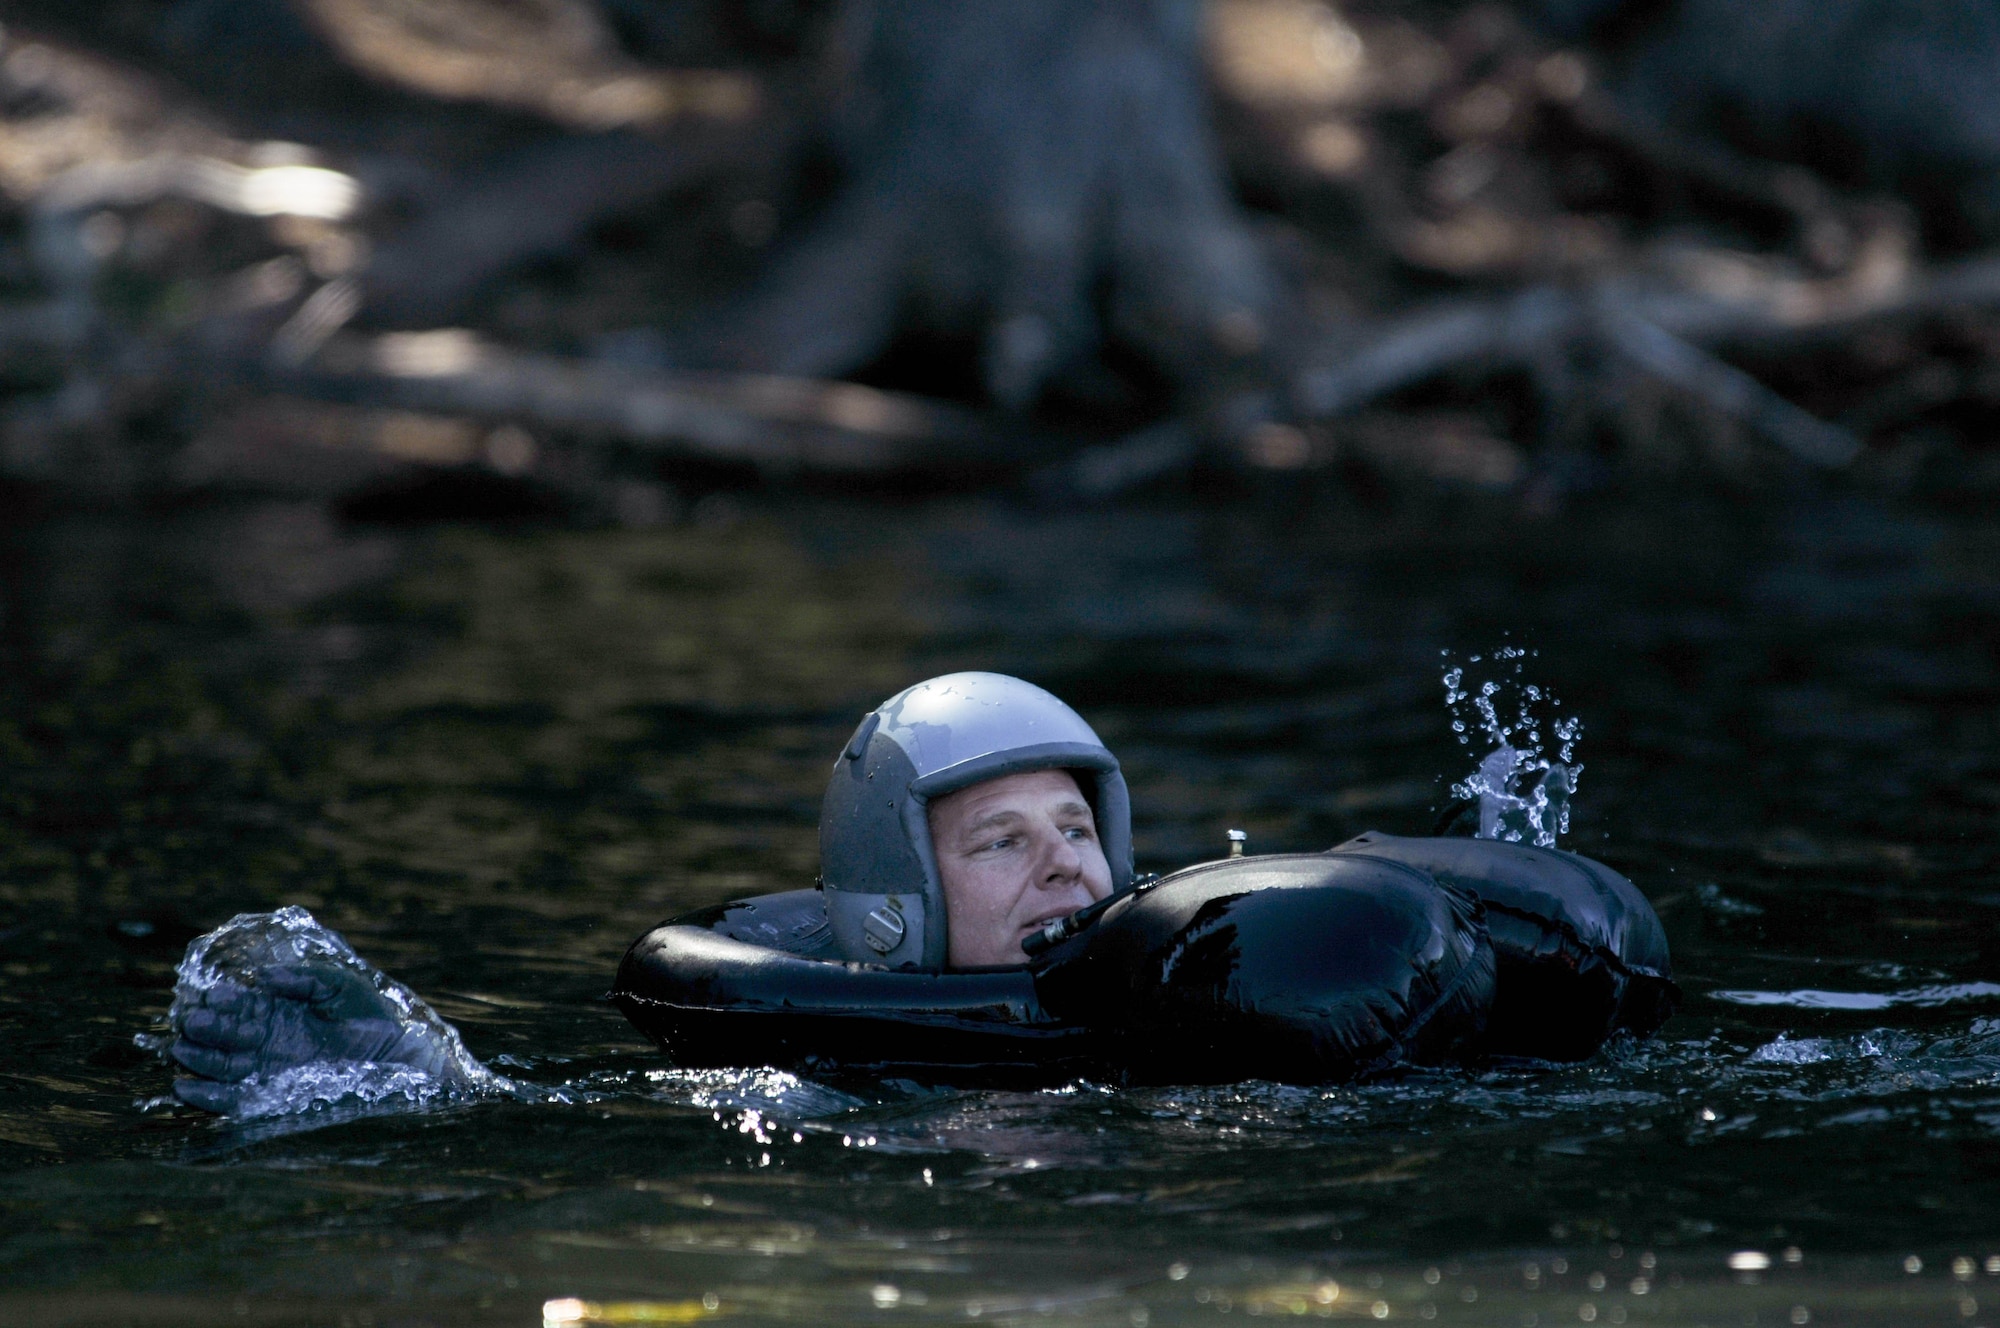 Oregon Air National Guard Maj. Ryan Bocchi, 114th Fighter Squadron pilot, swims to shore during water survival training at Lake of the Woods near Klamath Falls, Ore., July 22, 2016. Aircrew Flight Equipment members helped Kingsley’s F-15 pilots, providing water survival training in the event of an emergency ejection. (U.S. Air National Guard photo by Staff Sgt. Penny Snoozy)